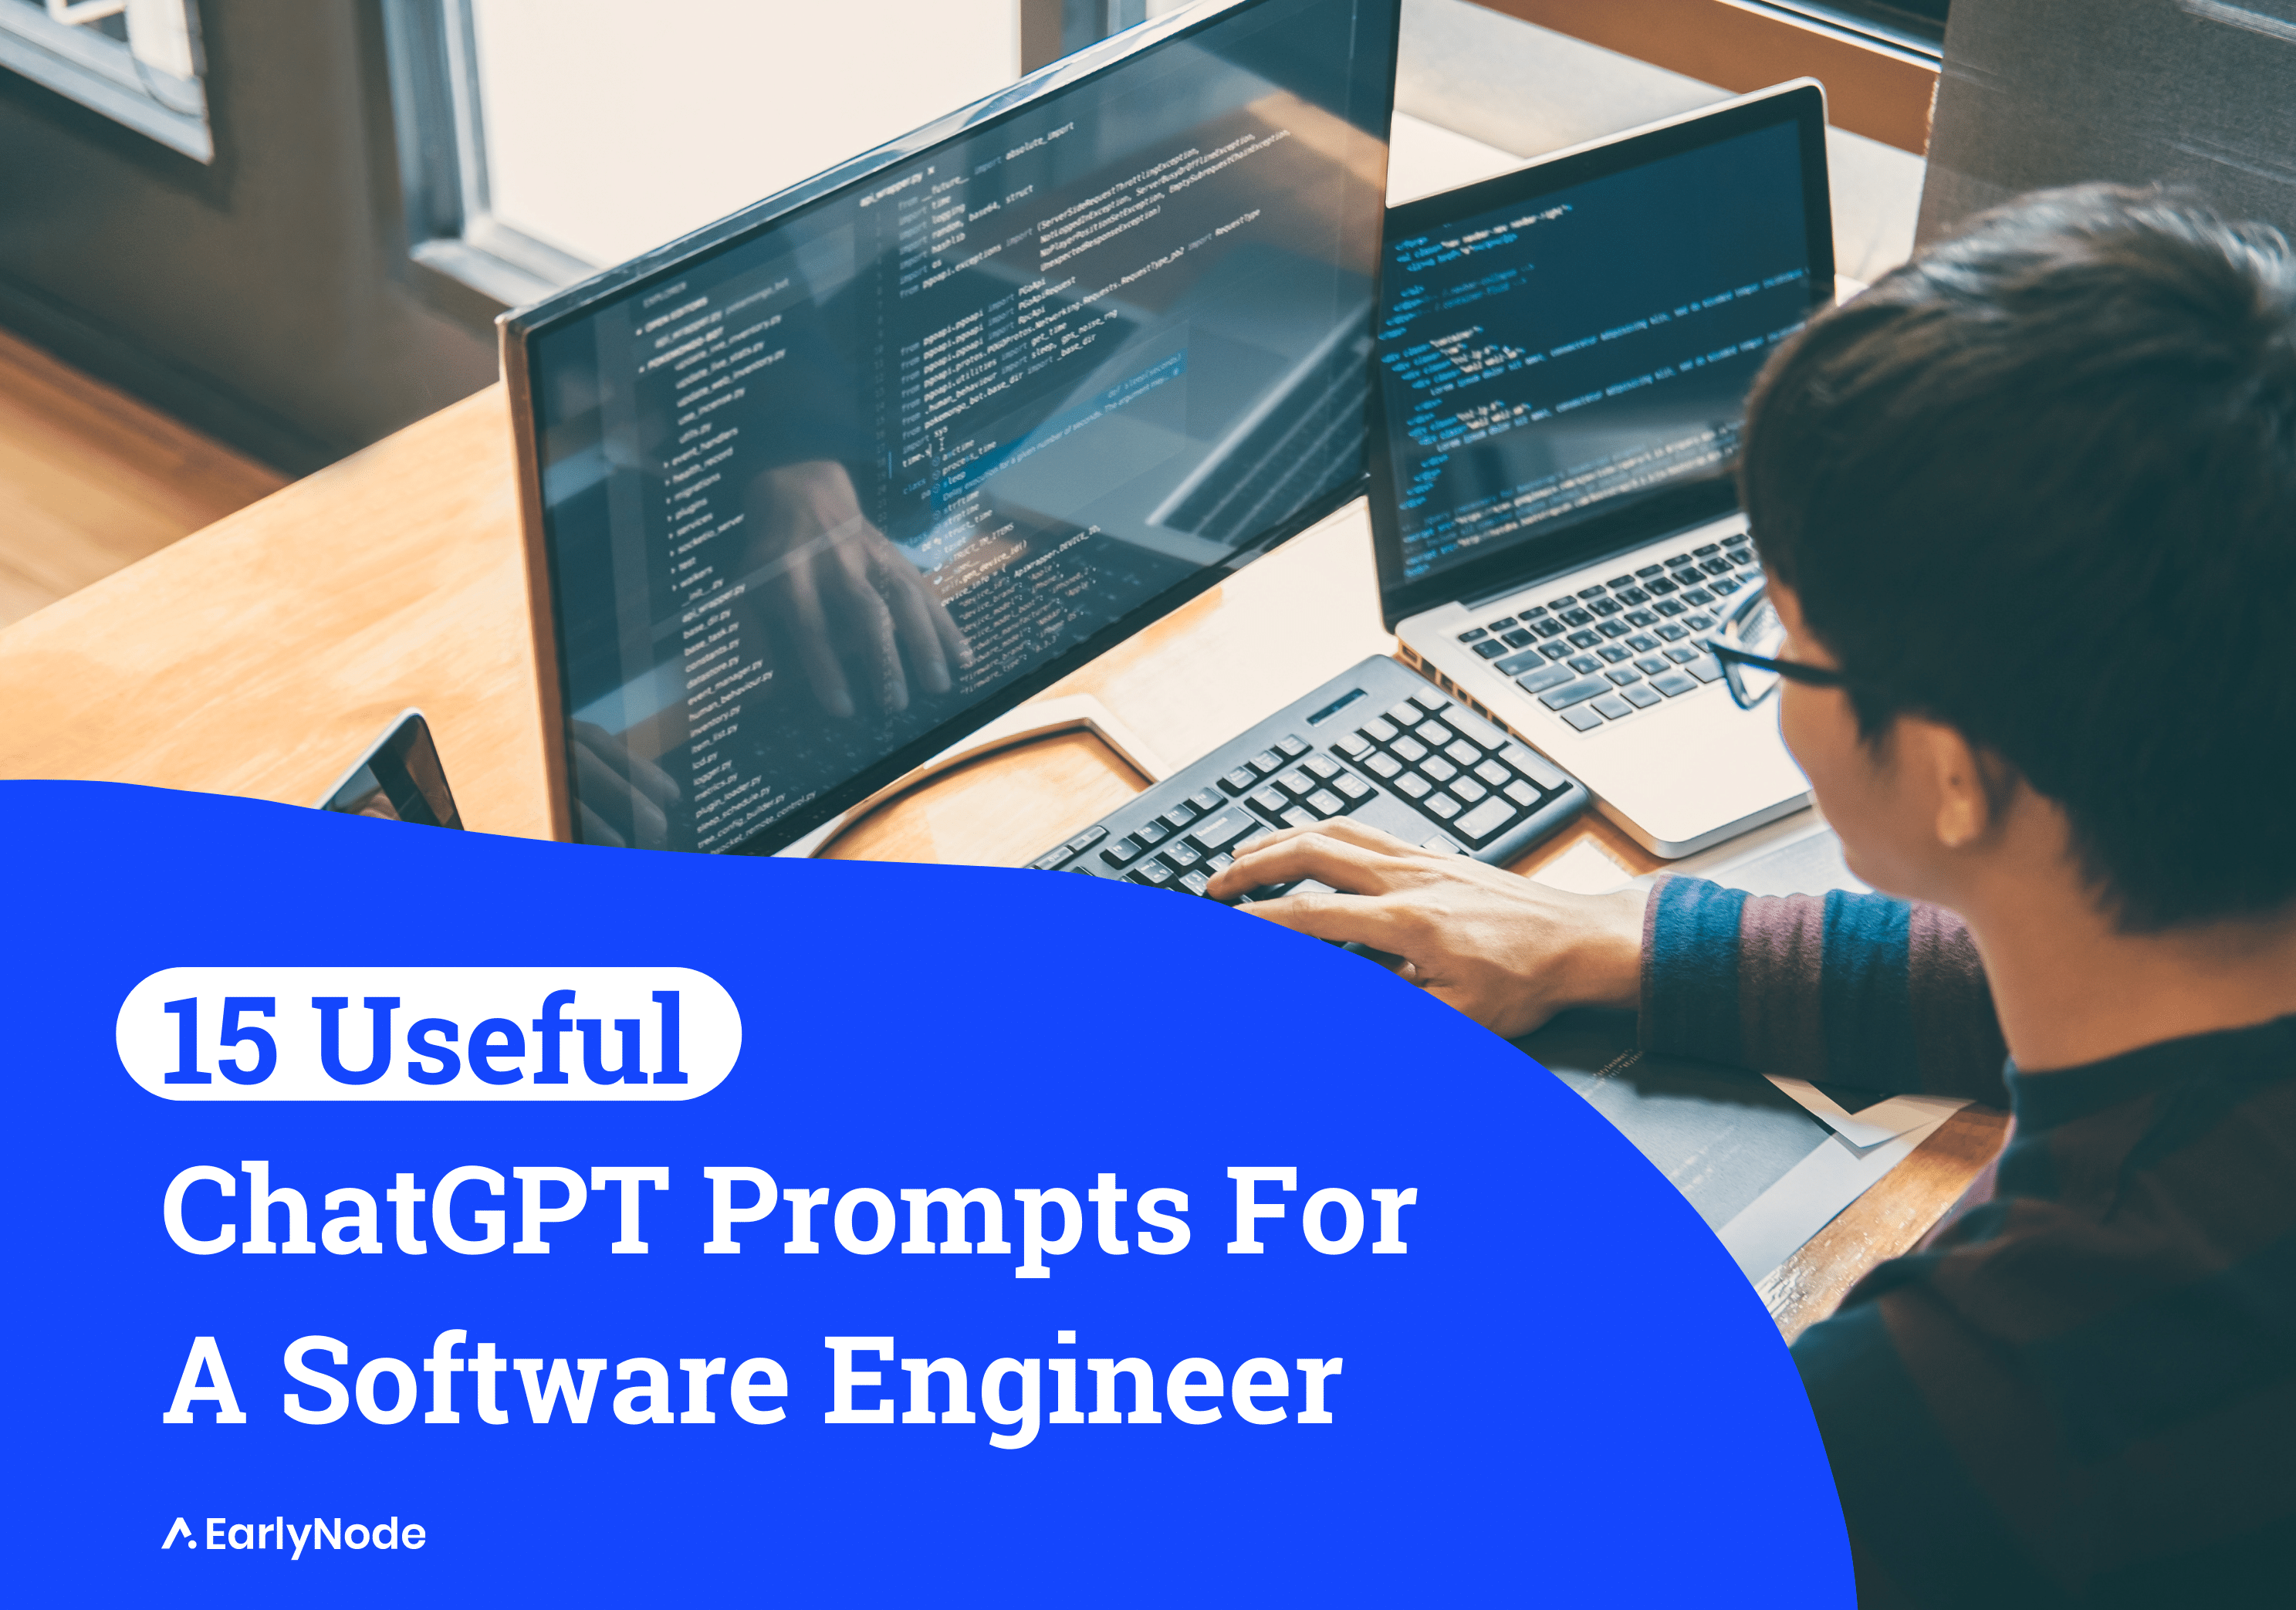 15 Technical ChatGPT Prompts For Software Engineers